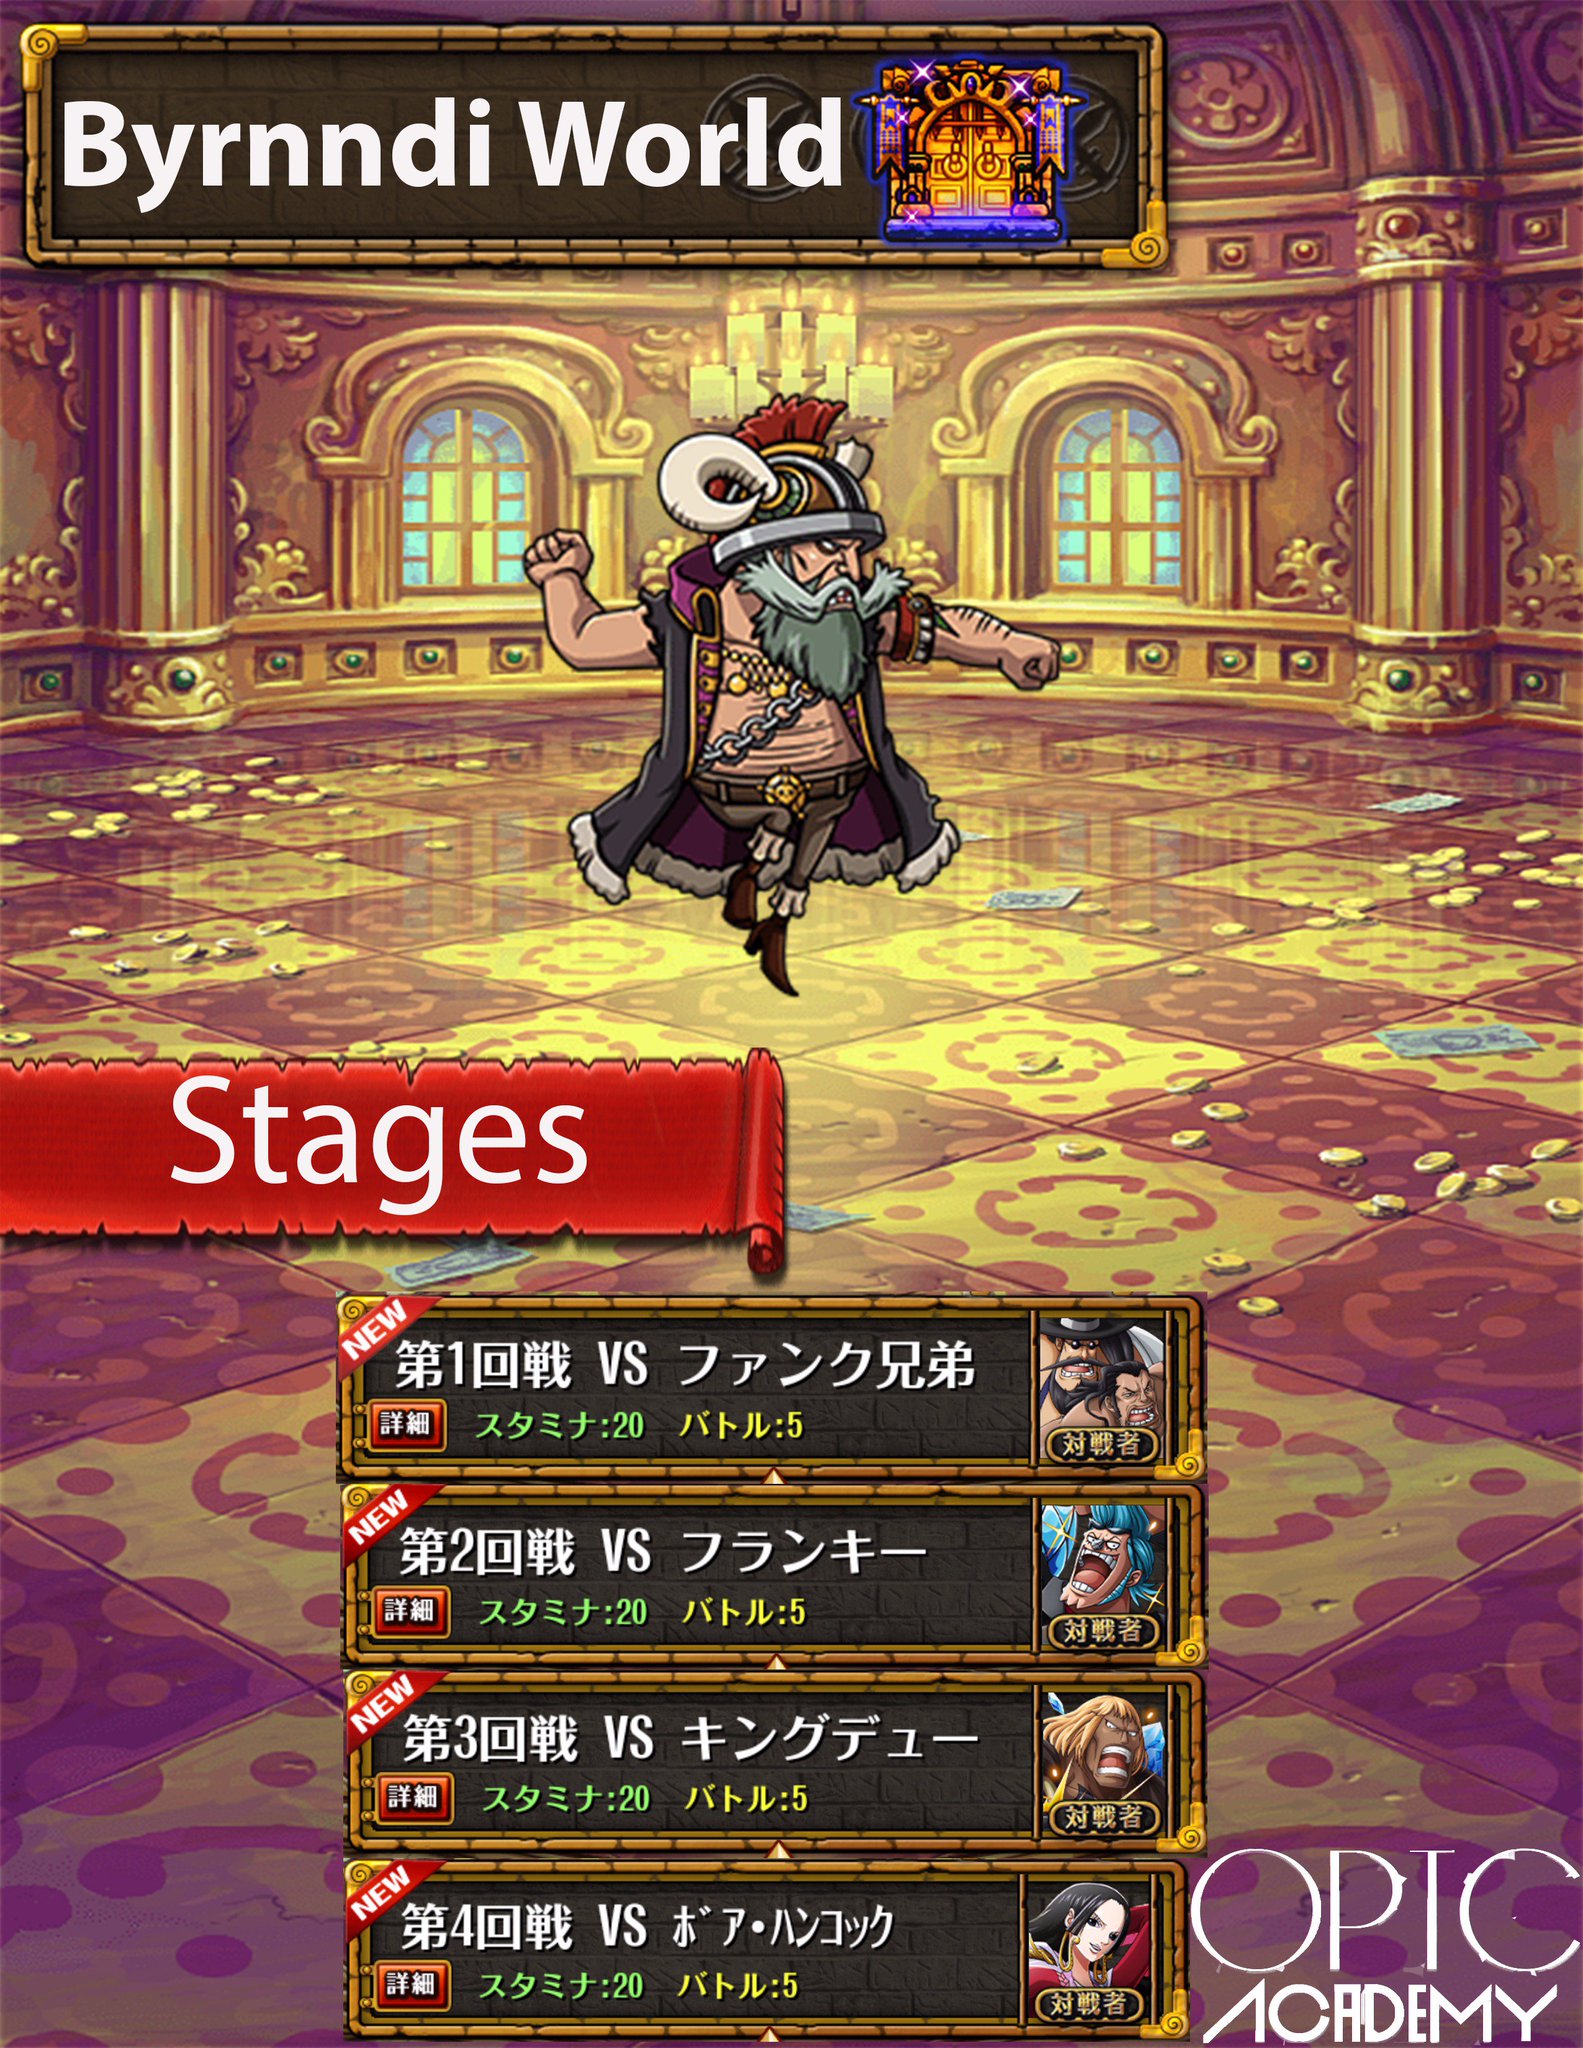 OPTC Academy on Twitter "Coliseum Stages…